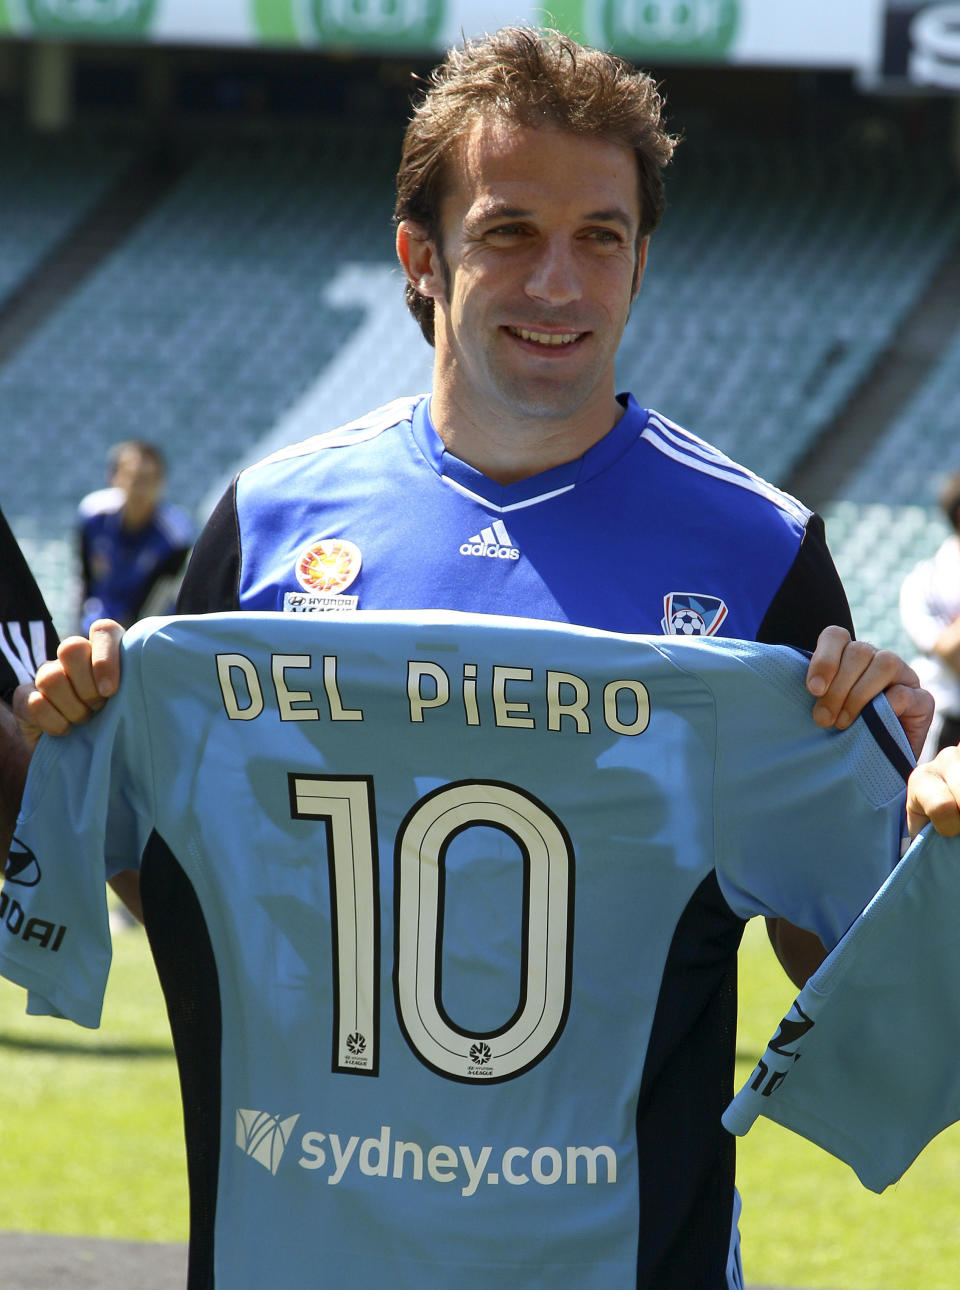 FILE - Former Juventus soccer star Alessandro Del Piero holds his newly acquired shirt during a training session with his new club Sydney FC in Sydney, on Sept. 23, 2012. Cristiano Ronaldo is not the first soccer superstar to head off to one of the world’s supposed minor leagues in the latter years of his career. Del Piero, the majestic Italy World Cup-winning forward, is comfortably the biggest name to have played in Australian soccer after his two years with Sydney FC (2012-14) on what was described by the club as the “largest professional sporting contract in Australian history” -- a reported $2 million a season.(AP Photo/Rick Rycroft, File)